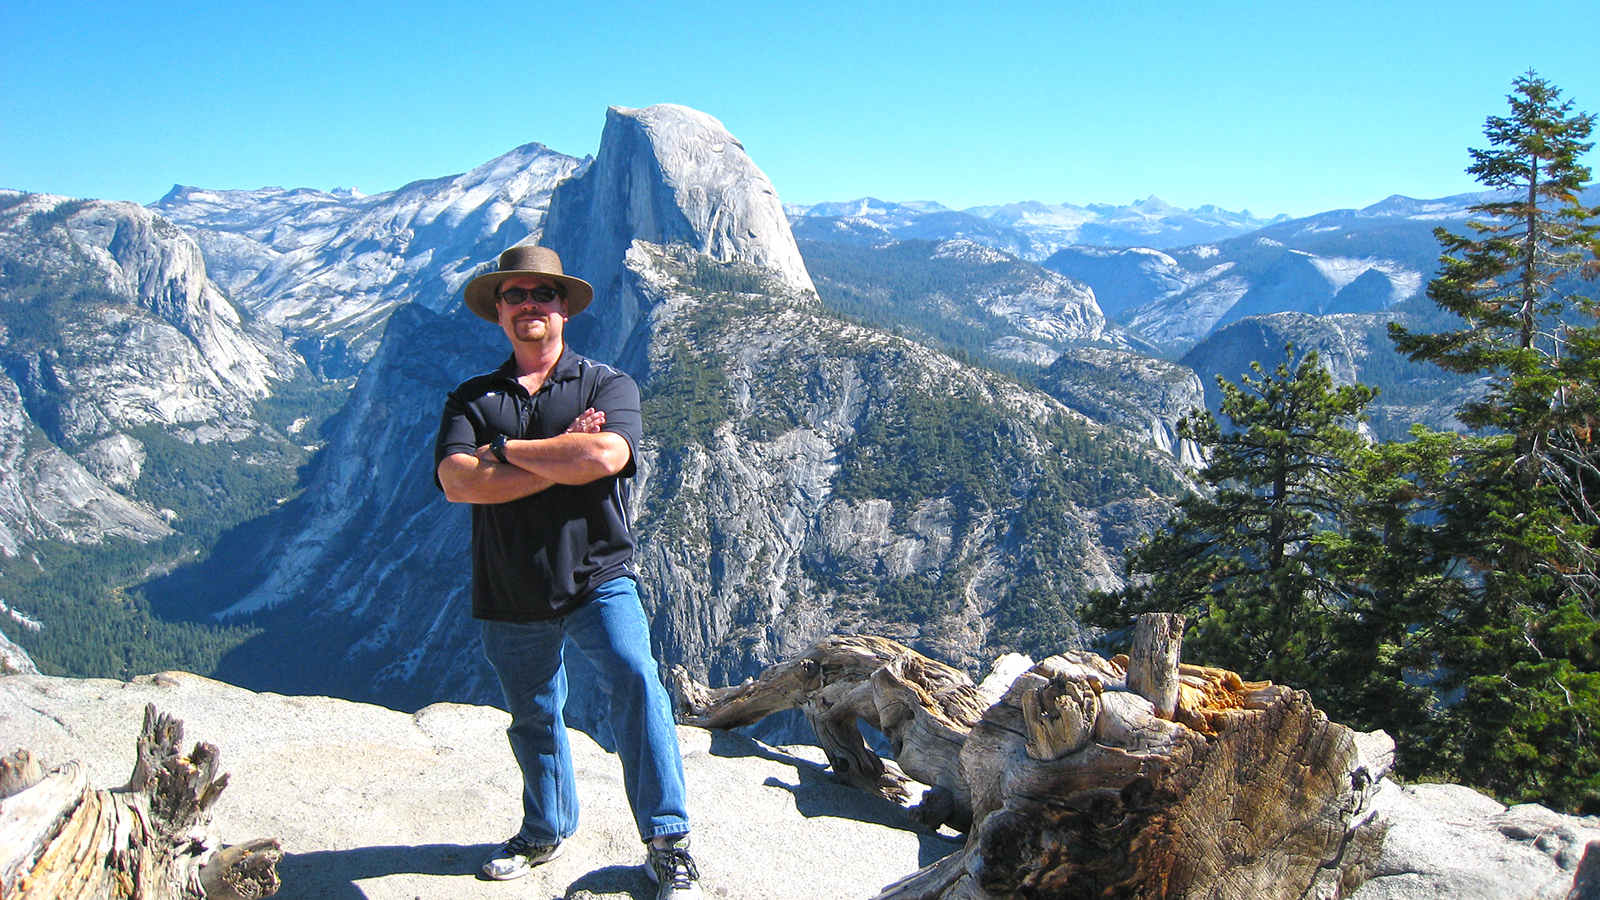 After my hike up Half Dome in Yosemite